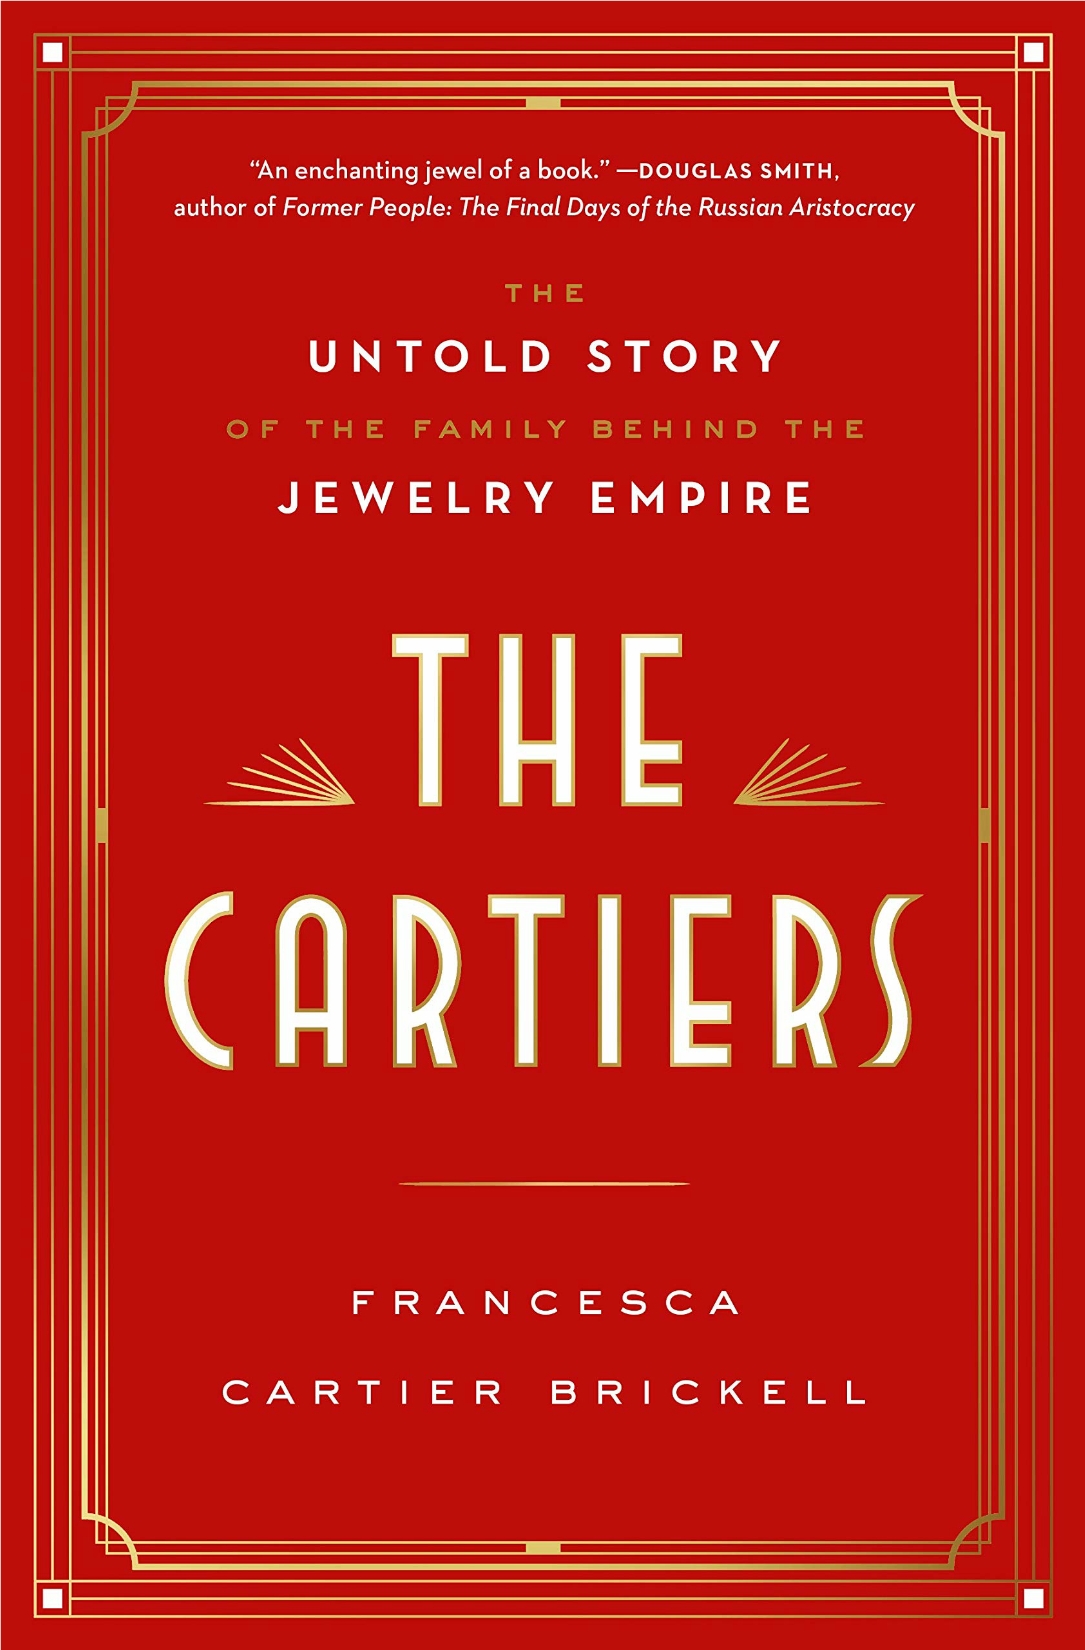 Books2 - The Cartiers